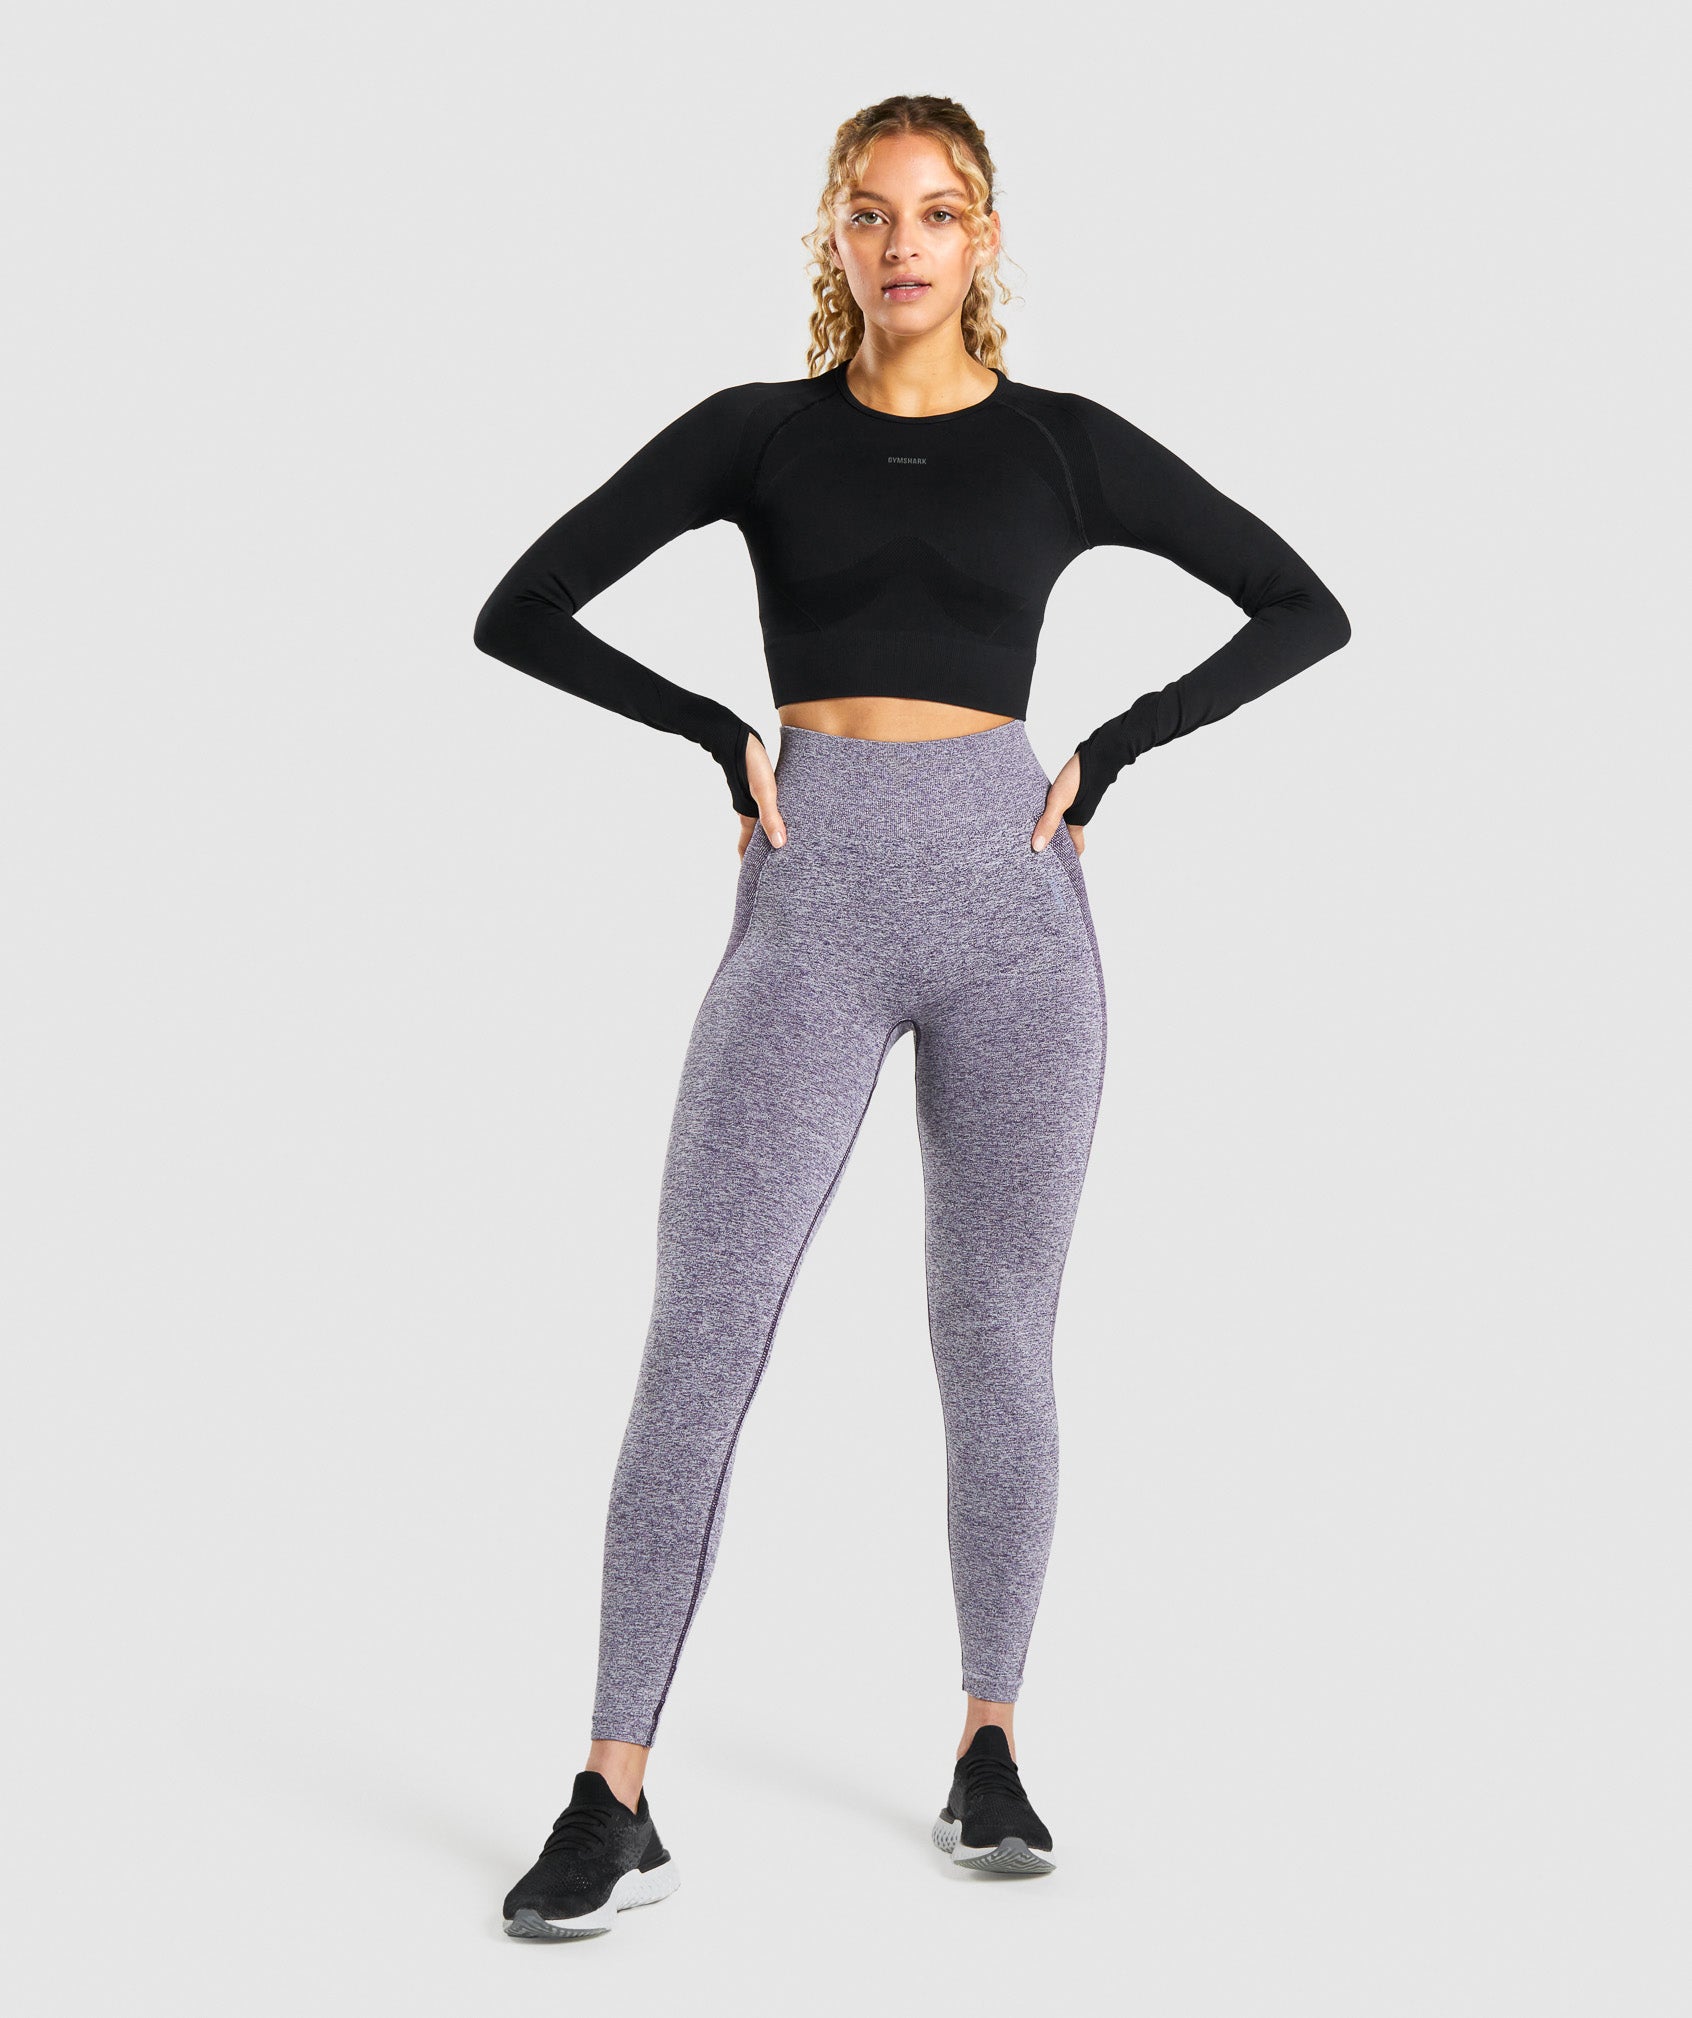 Flex Sports Long Sleeve Crop Top in Black/Charcoal - view 4